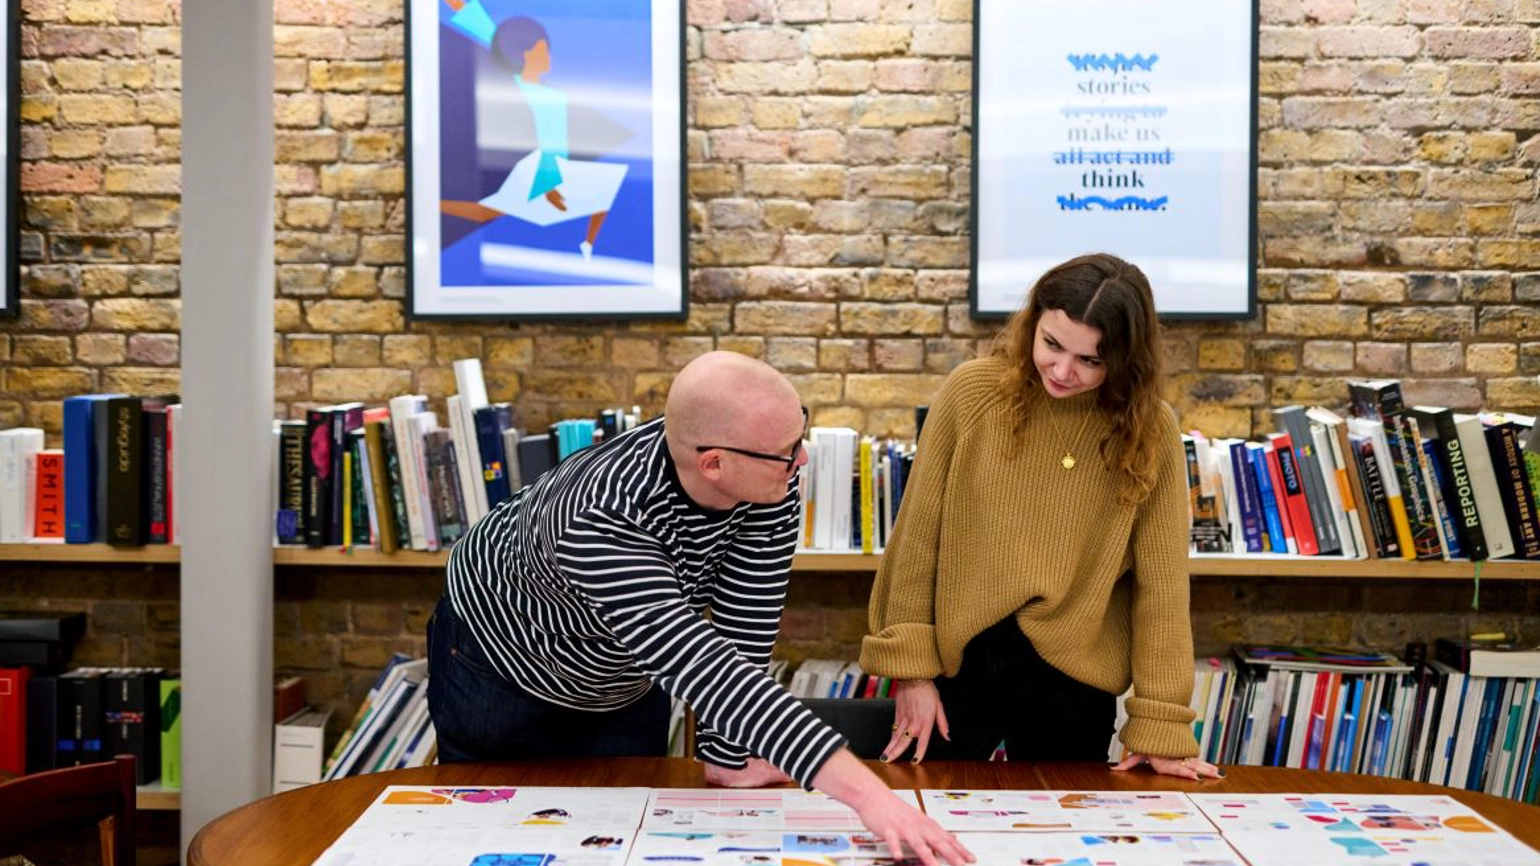 Two RY team members standing behind a desk, looking down large sheets of paper, the person on the left pointing towards the top. In the background are shelves of books and two large creative posters.